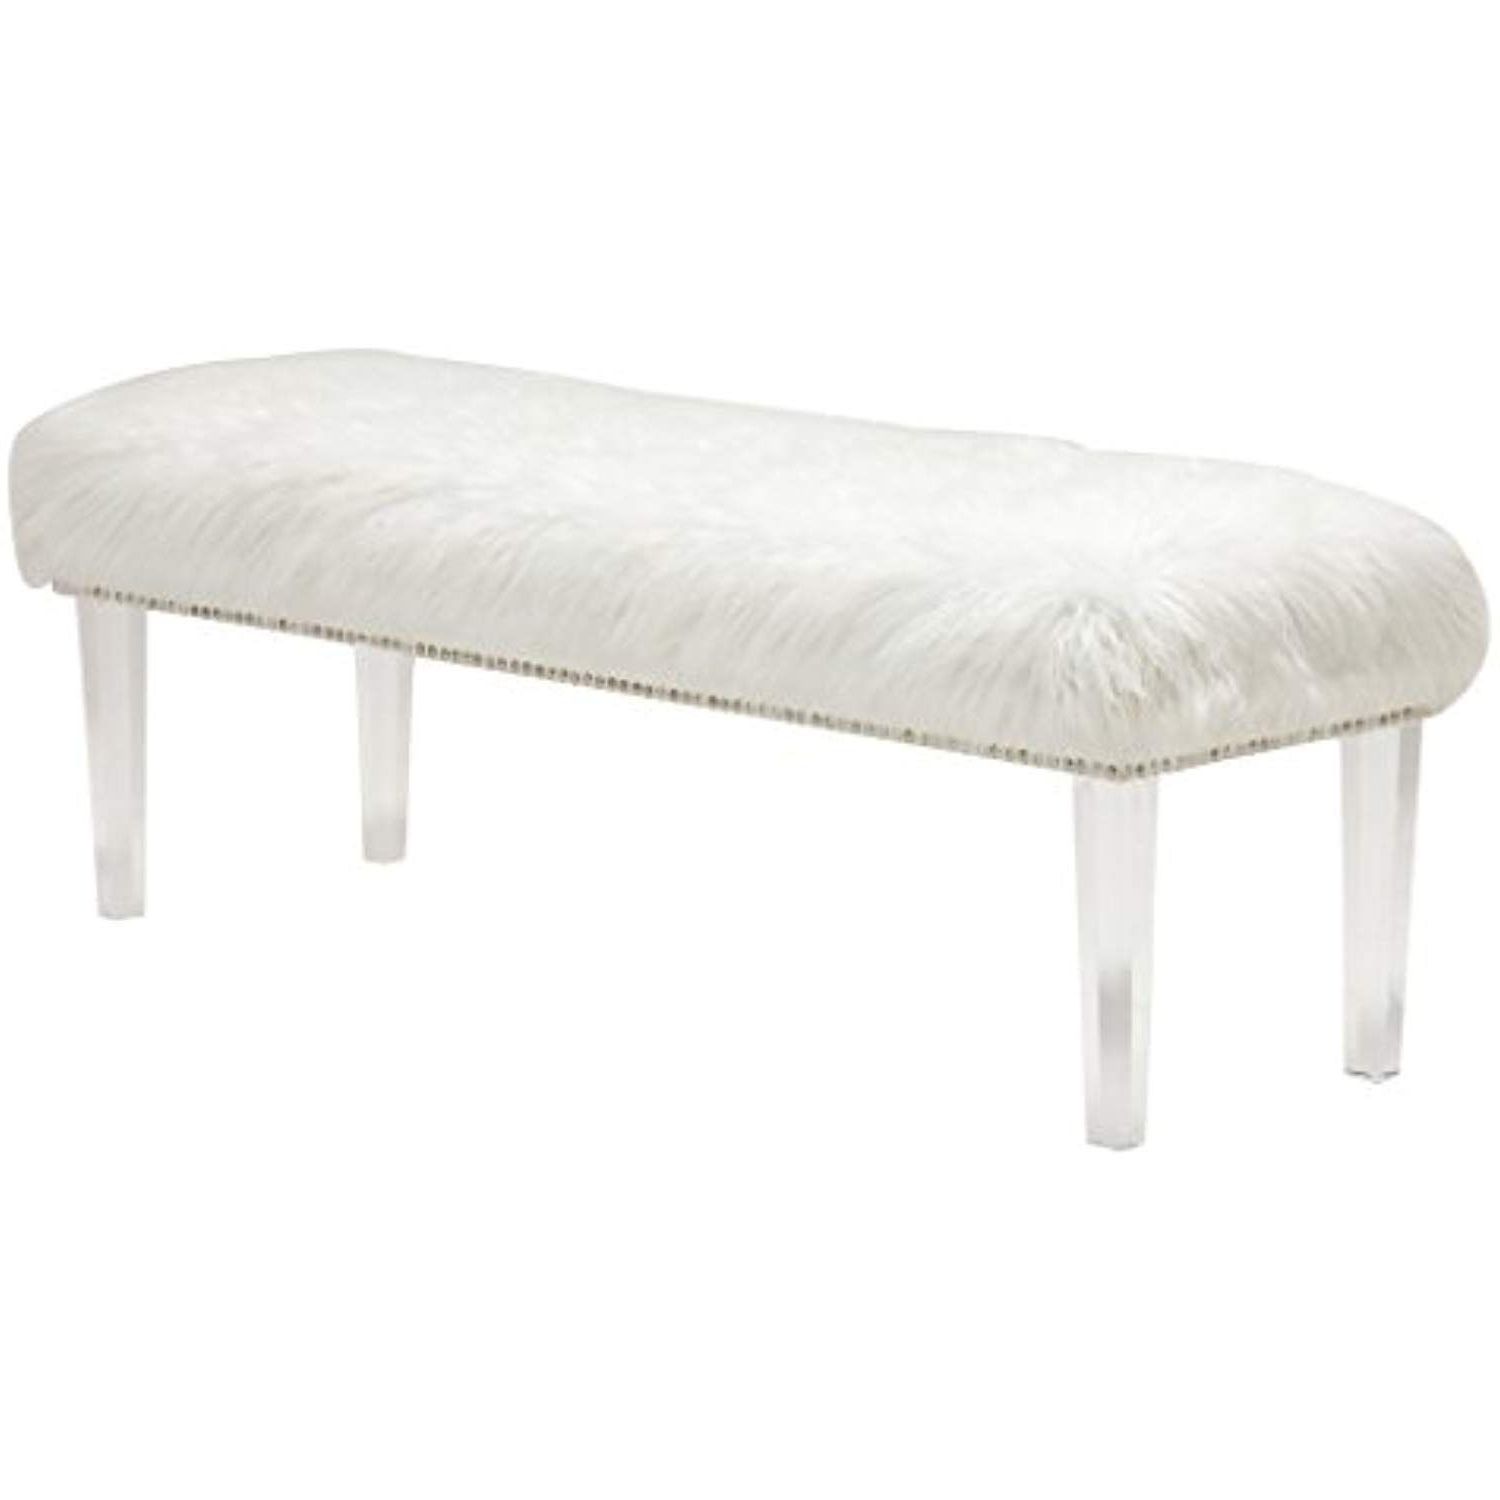 Andeworld White Faux Fur Bench With Acrylic Legs And Nailhead With Regard To 2018 White And Clear Acrylic Tufted Vanity Stools (View 6 of 10)